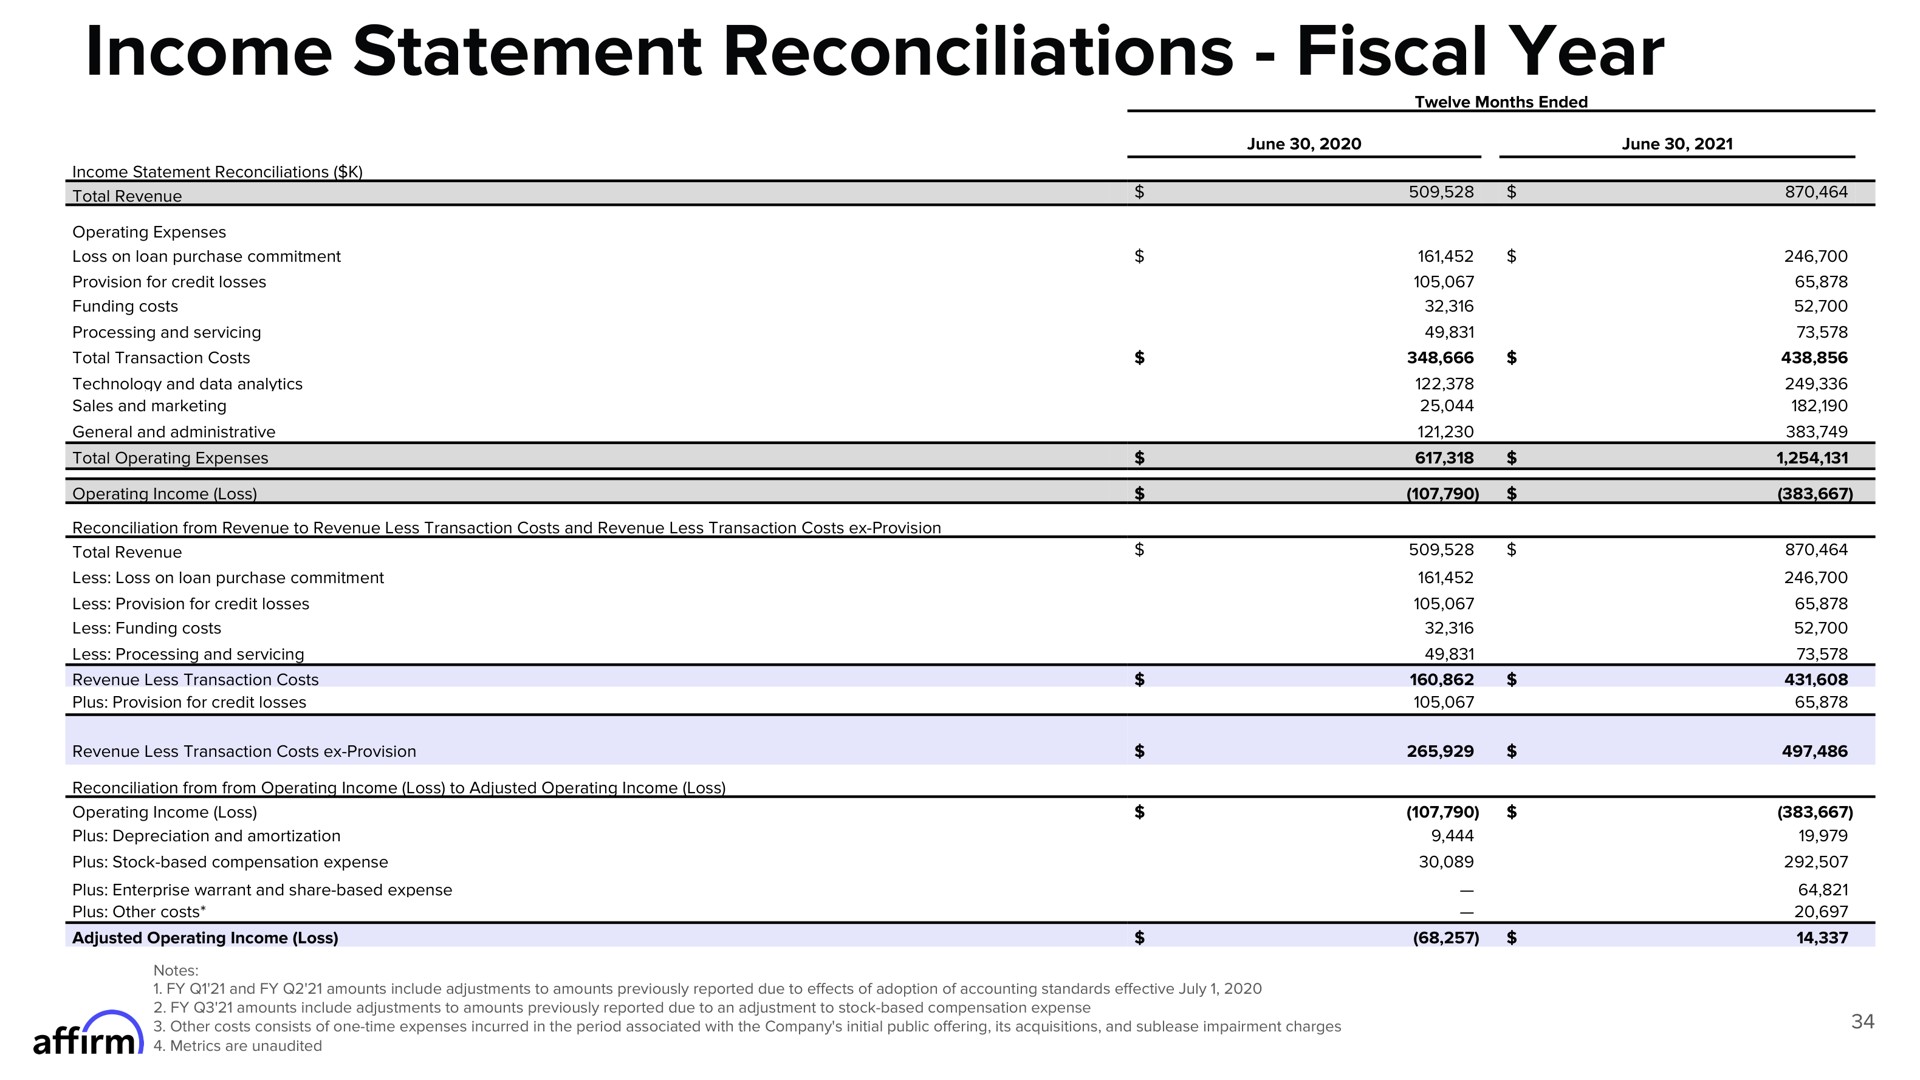 income statement reconciliations fiscal year | Affirm